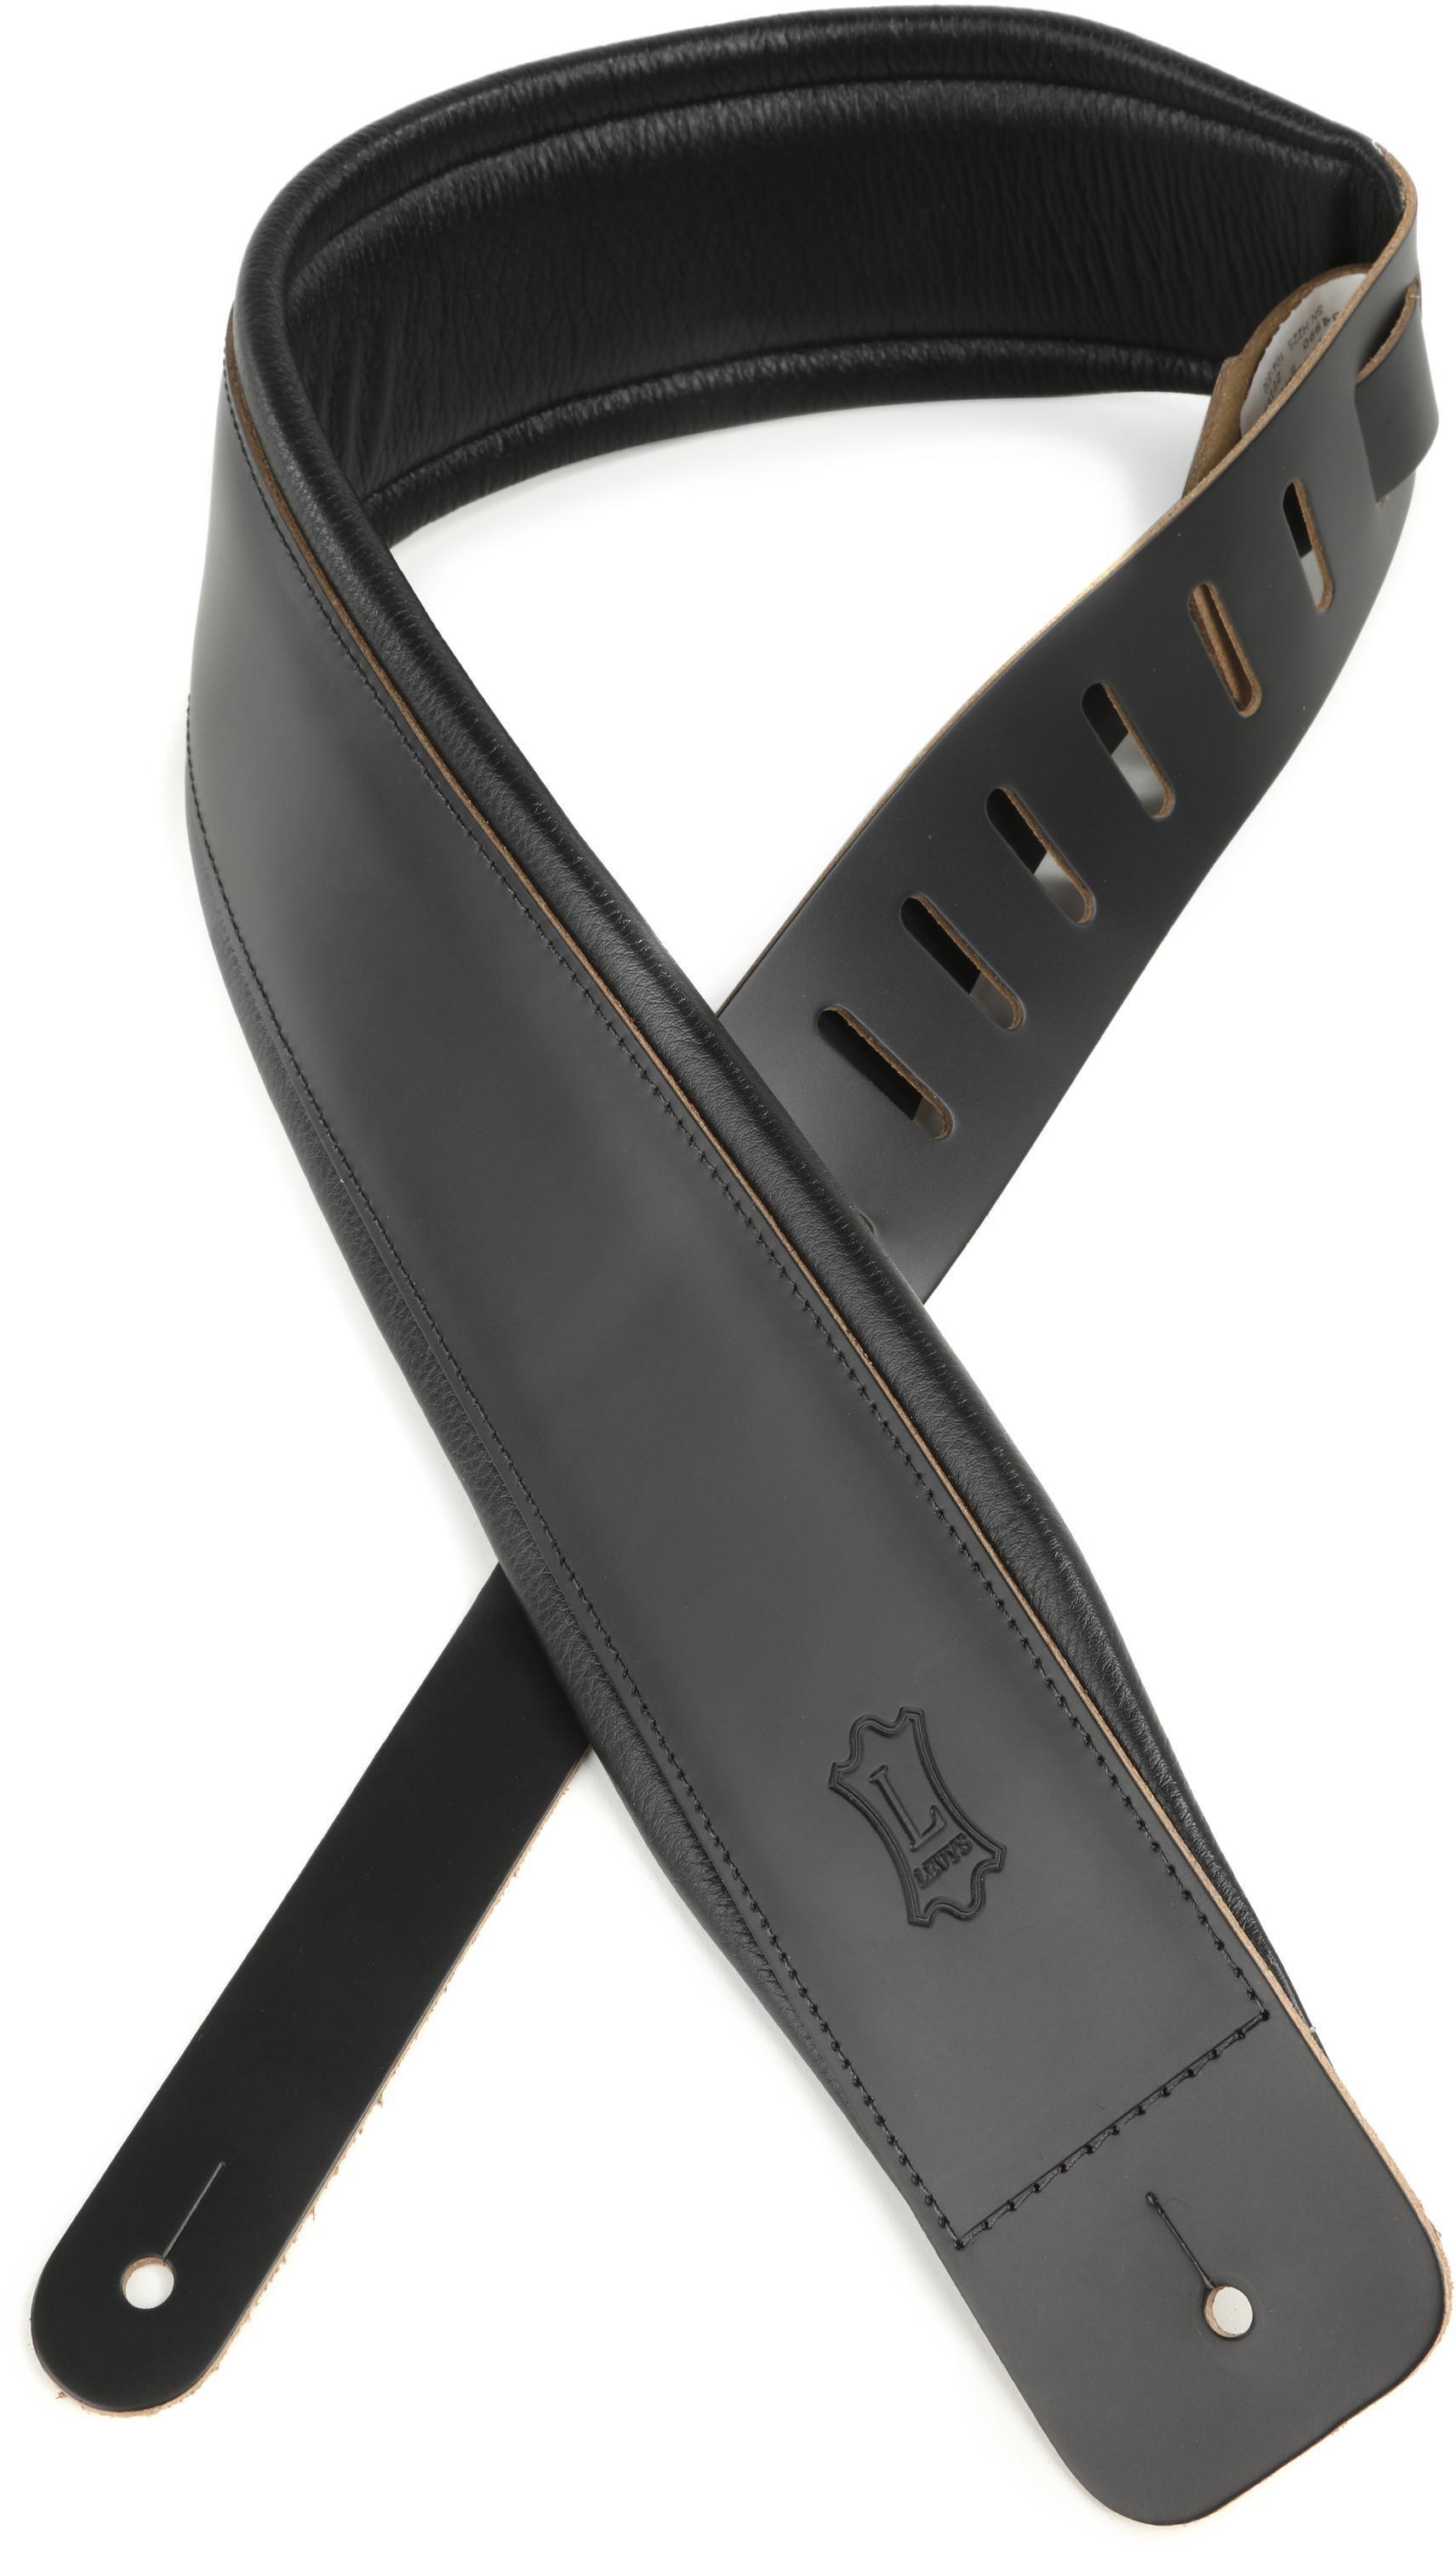  Logical Leather Padded Leather Guitar Strap